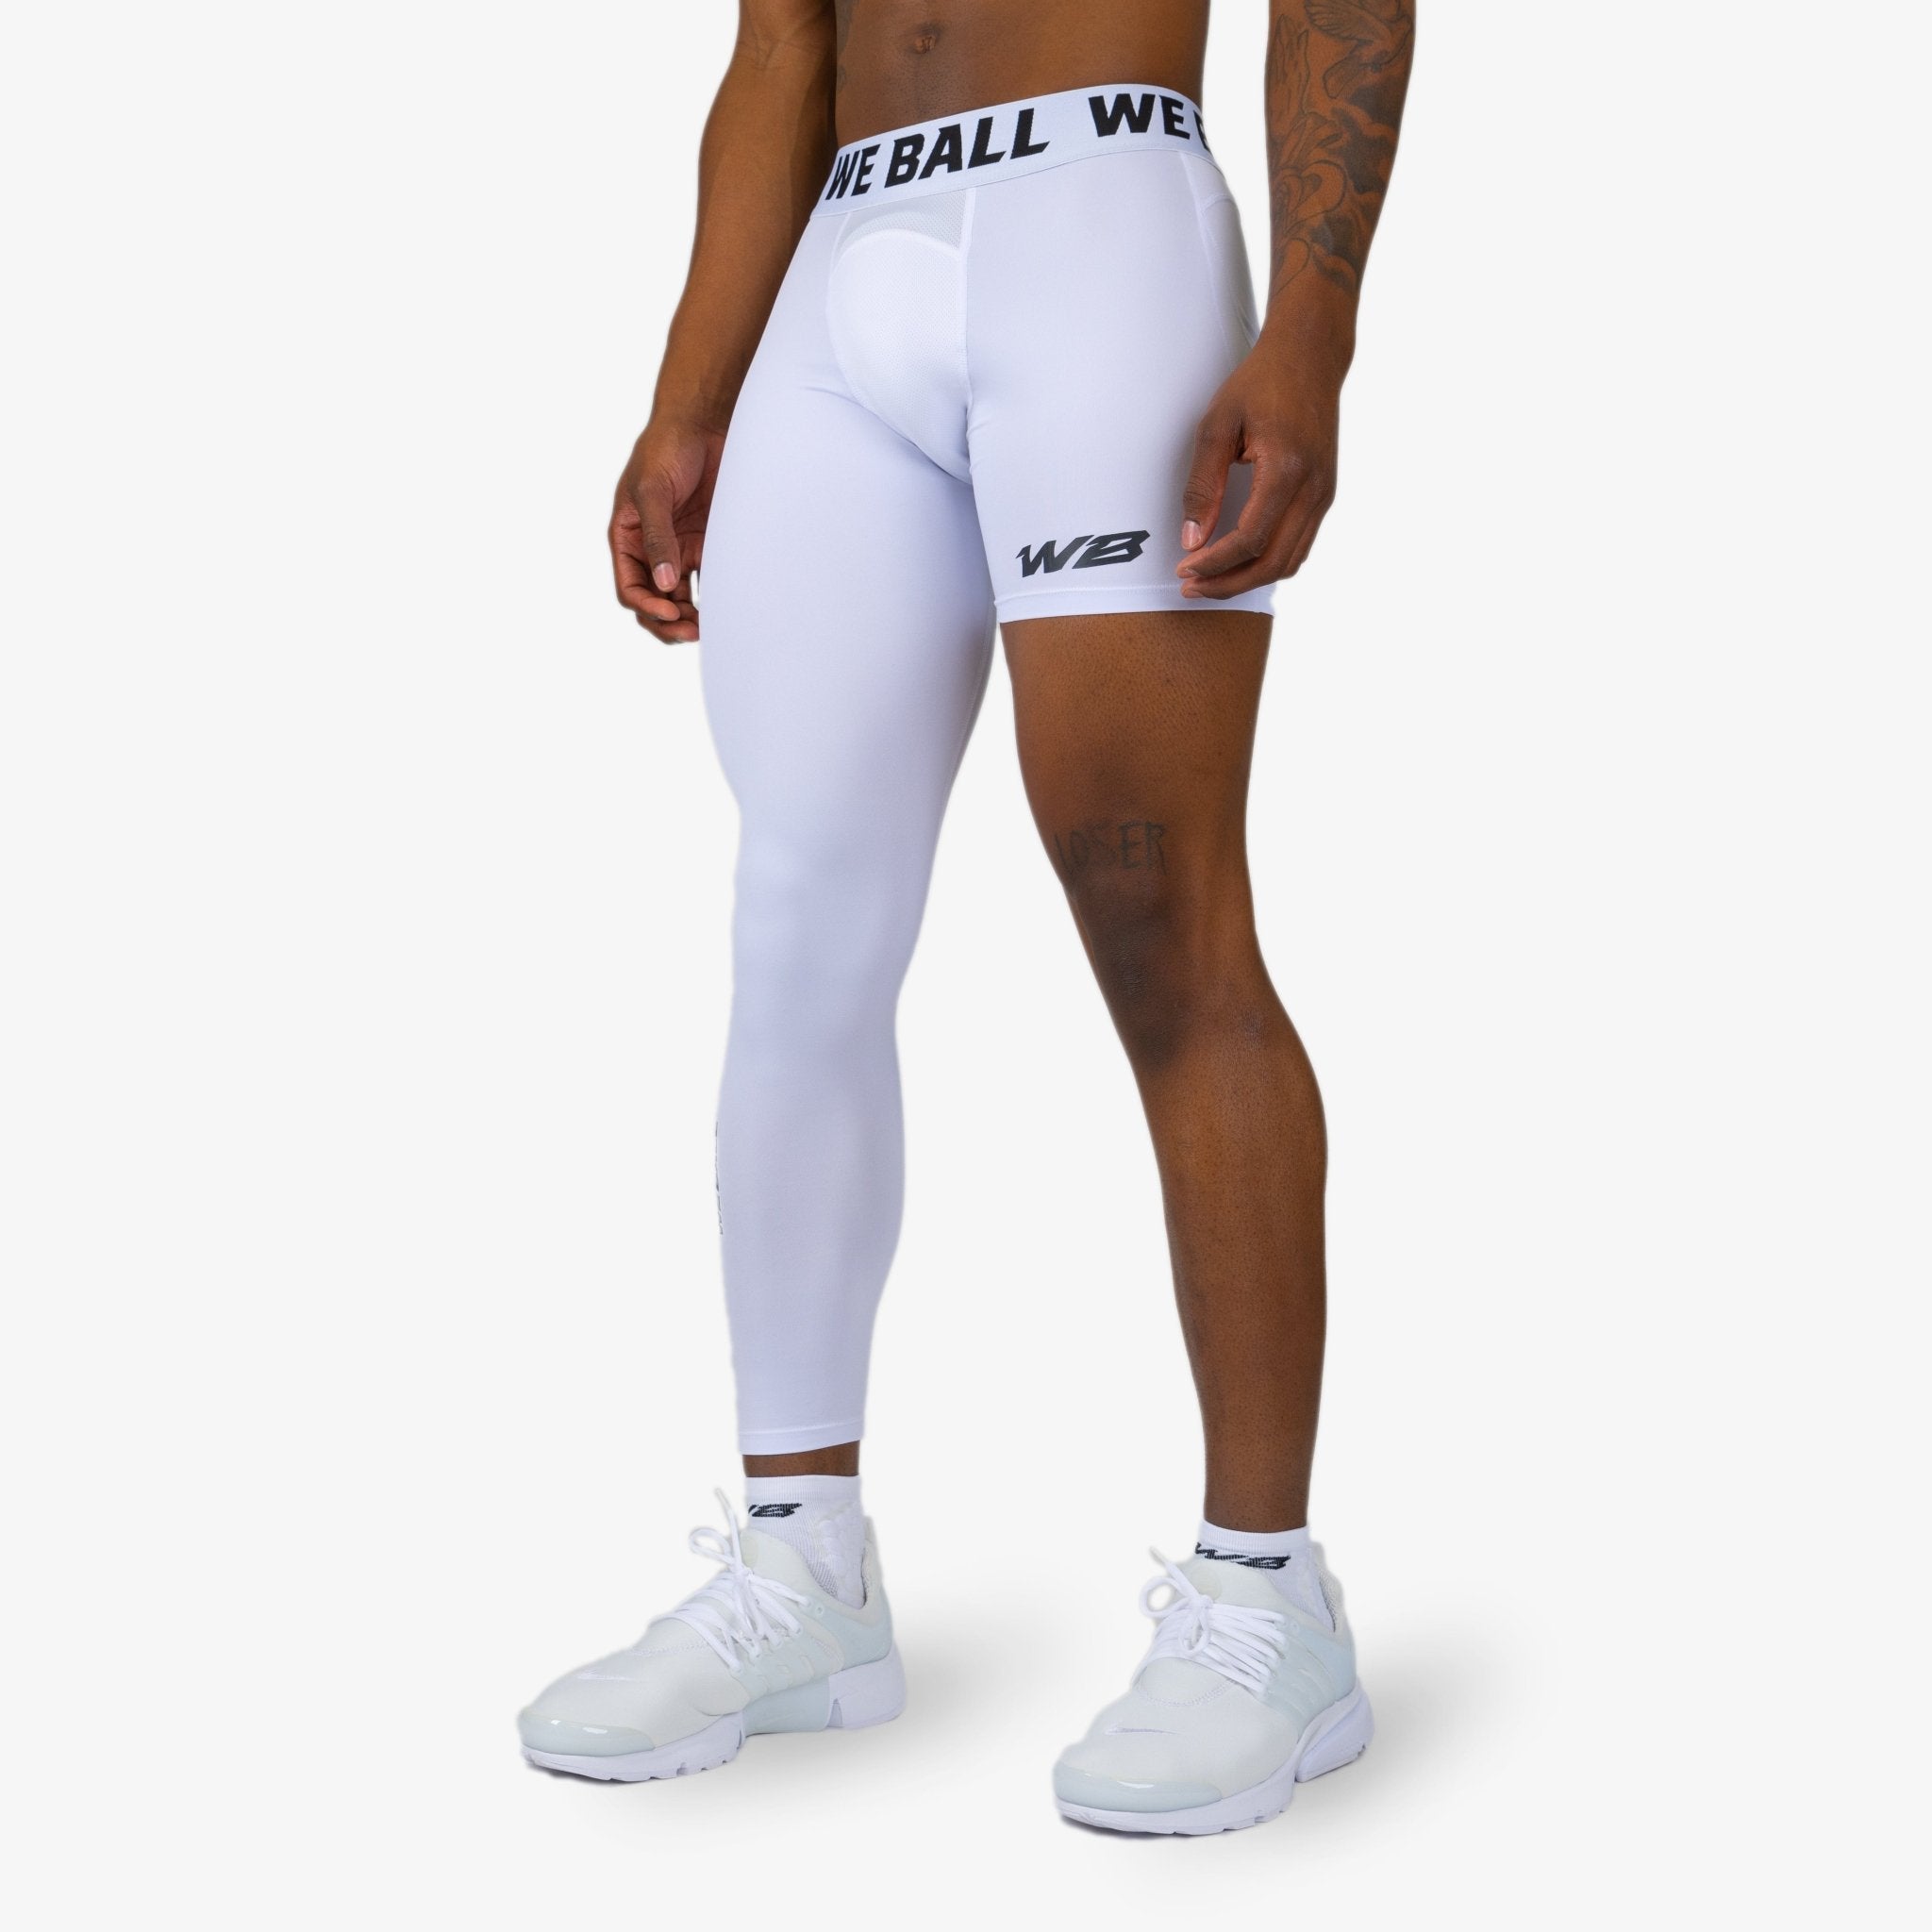  We Ball Sports Athletic Compression Tights